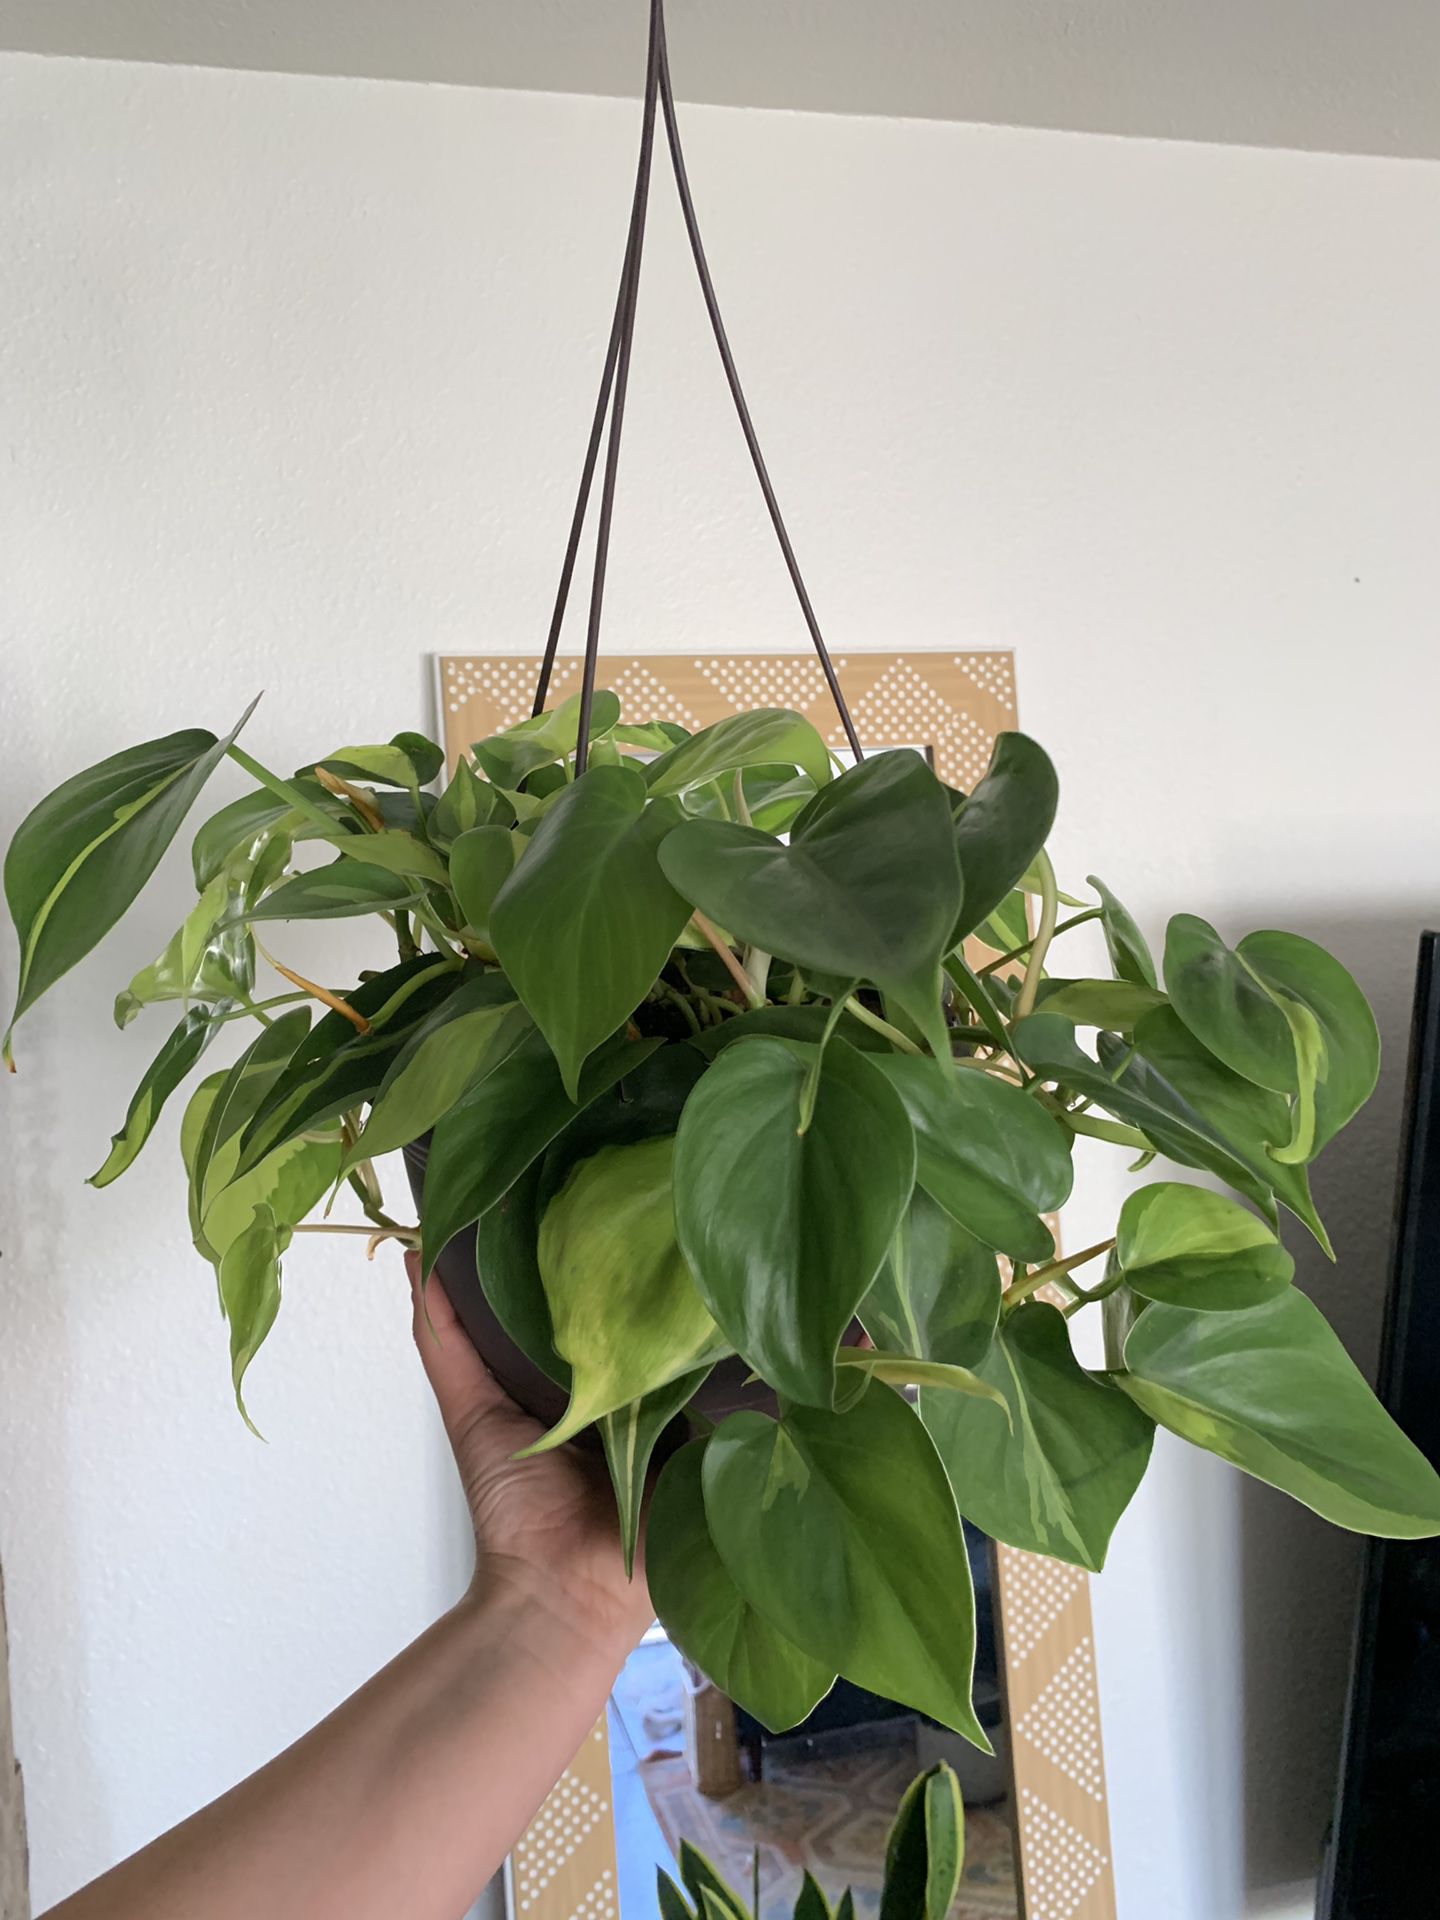 6” Philodendron Brazil